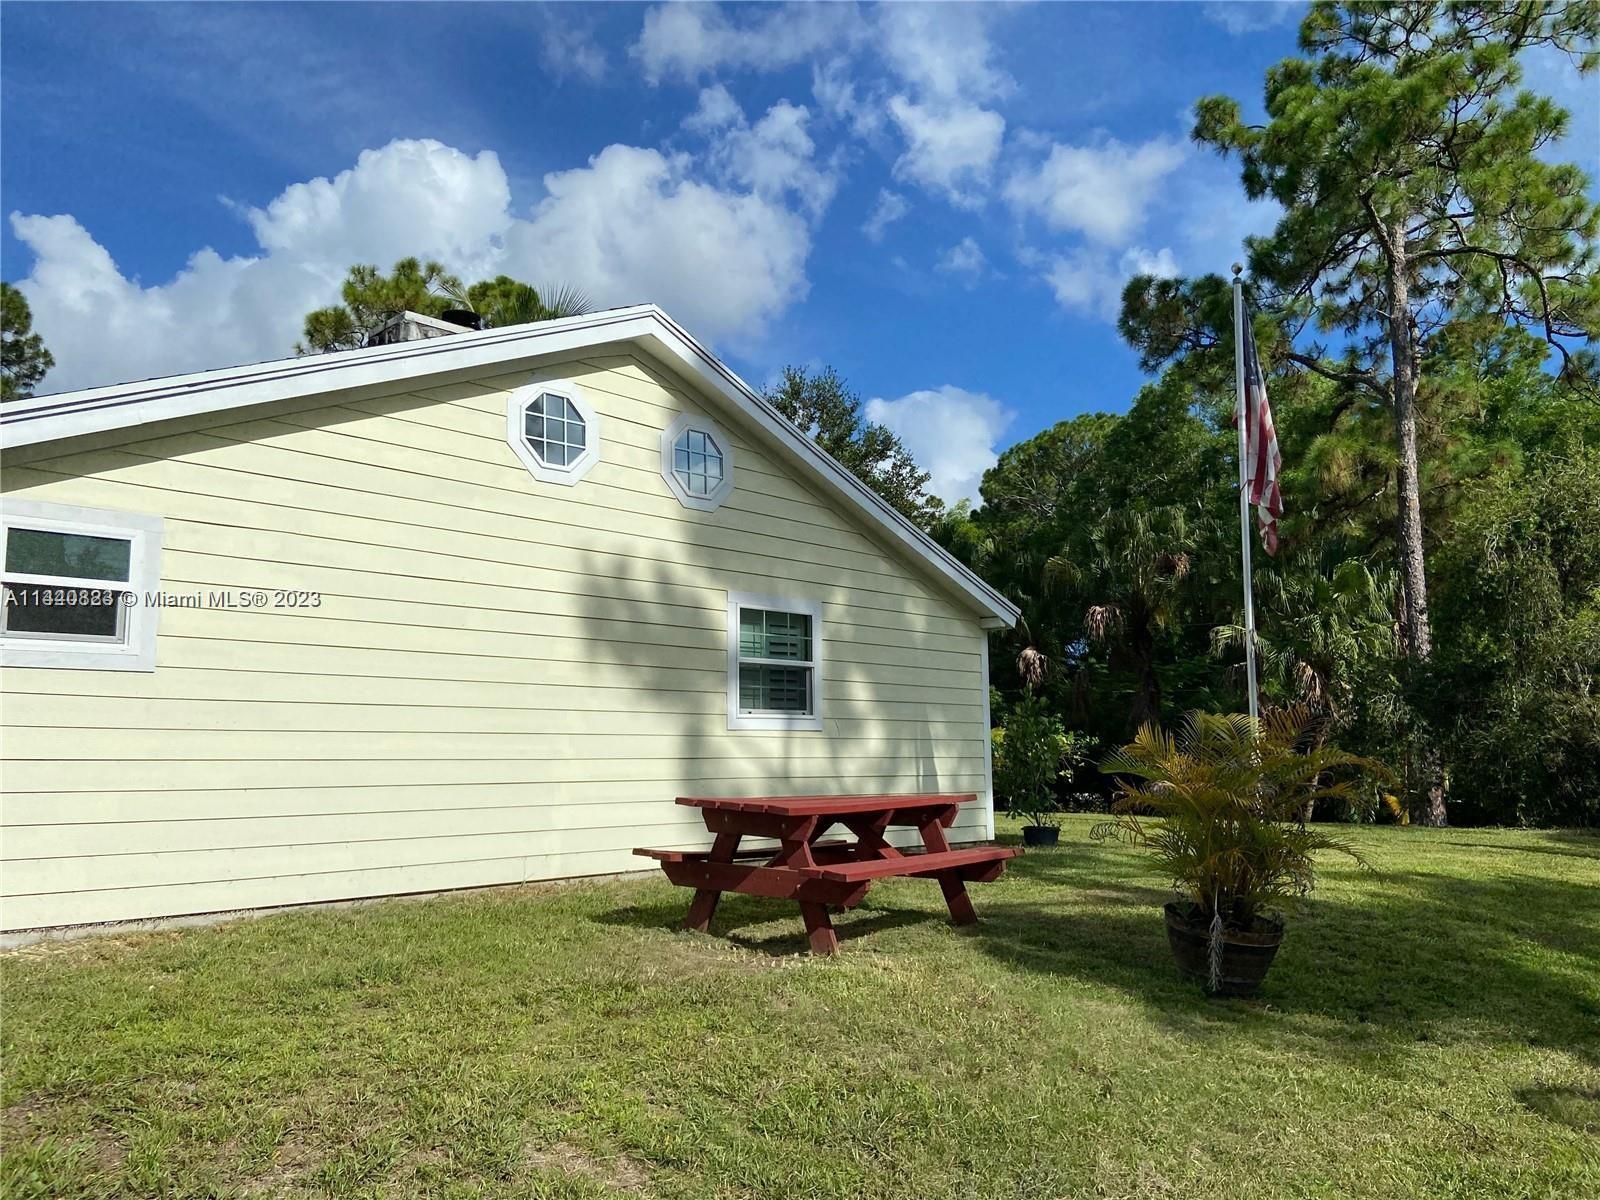 BEAUTIFUL 2 ACRES CORNER, Bright 3 bedrooms, 2 baths 2,075 sqft plus a Guest house with bathroom, PO